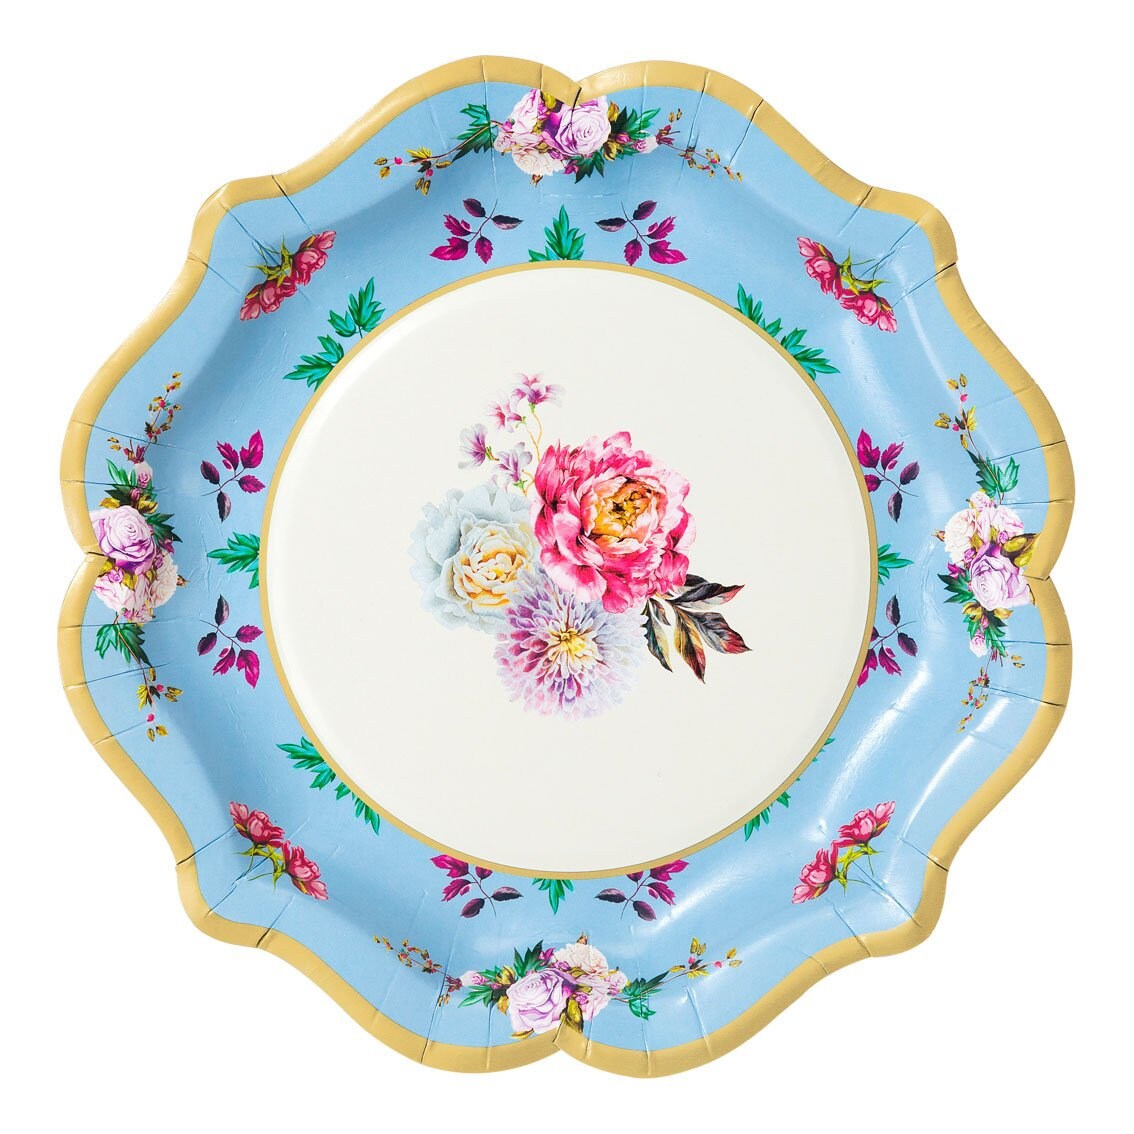 Pastel Pink Plaid Small Paper Plates